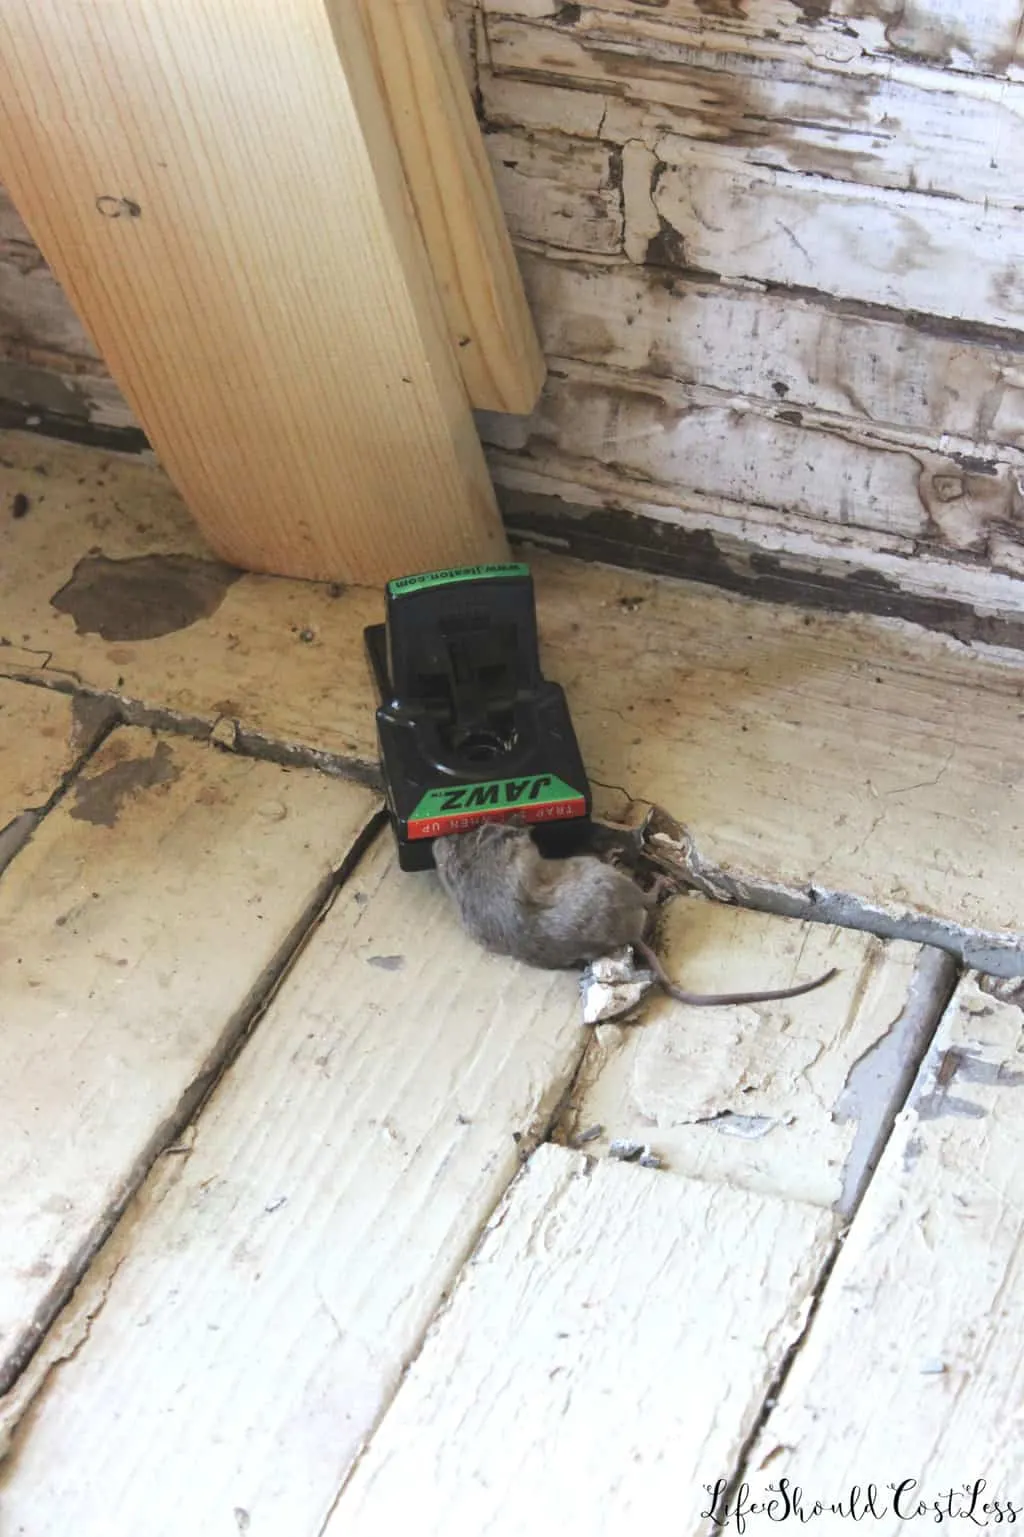 https://lifeshouldcostless.com/wp-content/uploads/2018/09/Mouse-In-Jawz-Mouse-Trap.-Jawz-Mouse-Trap-Product-Review.-lifeshouldcostless.com_.jpg.webp